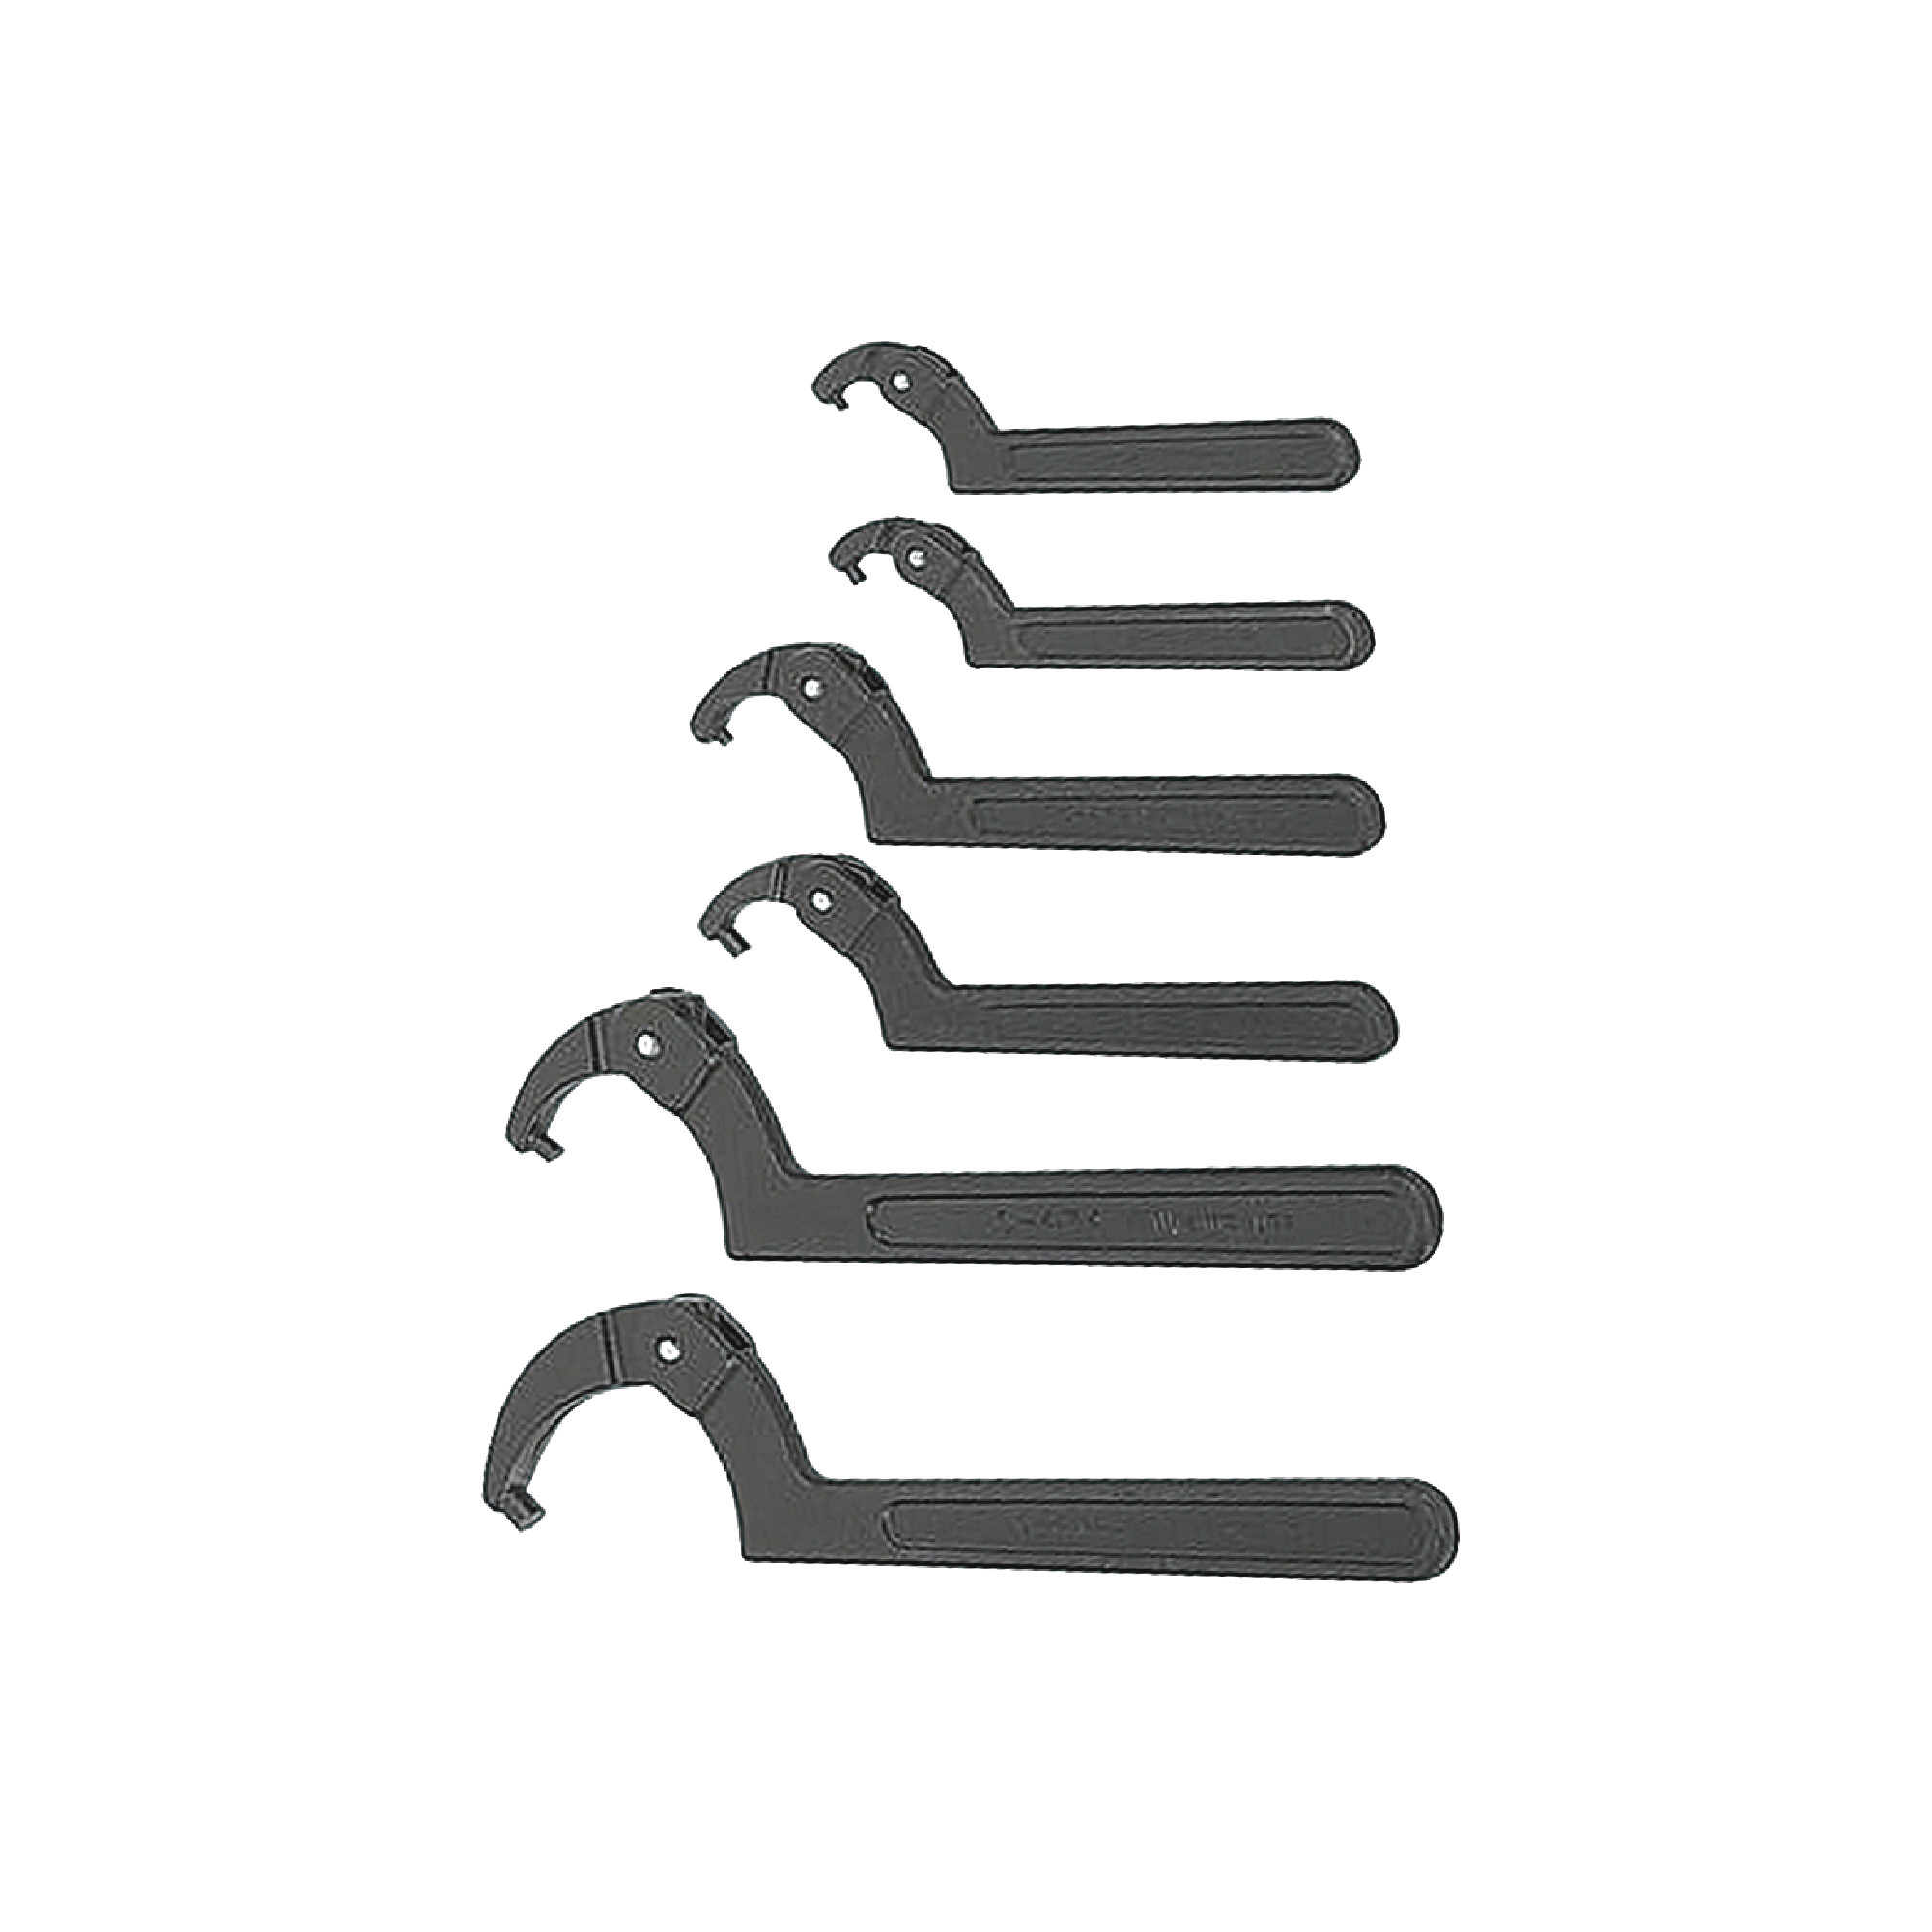 6 Piece Adjustable Pin Spanner Wrench Set - Model: WS-476